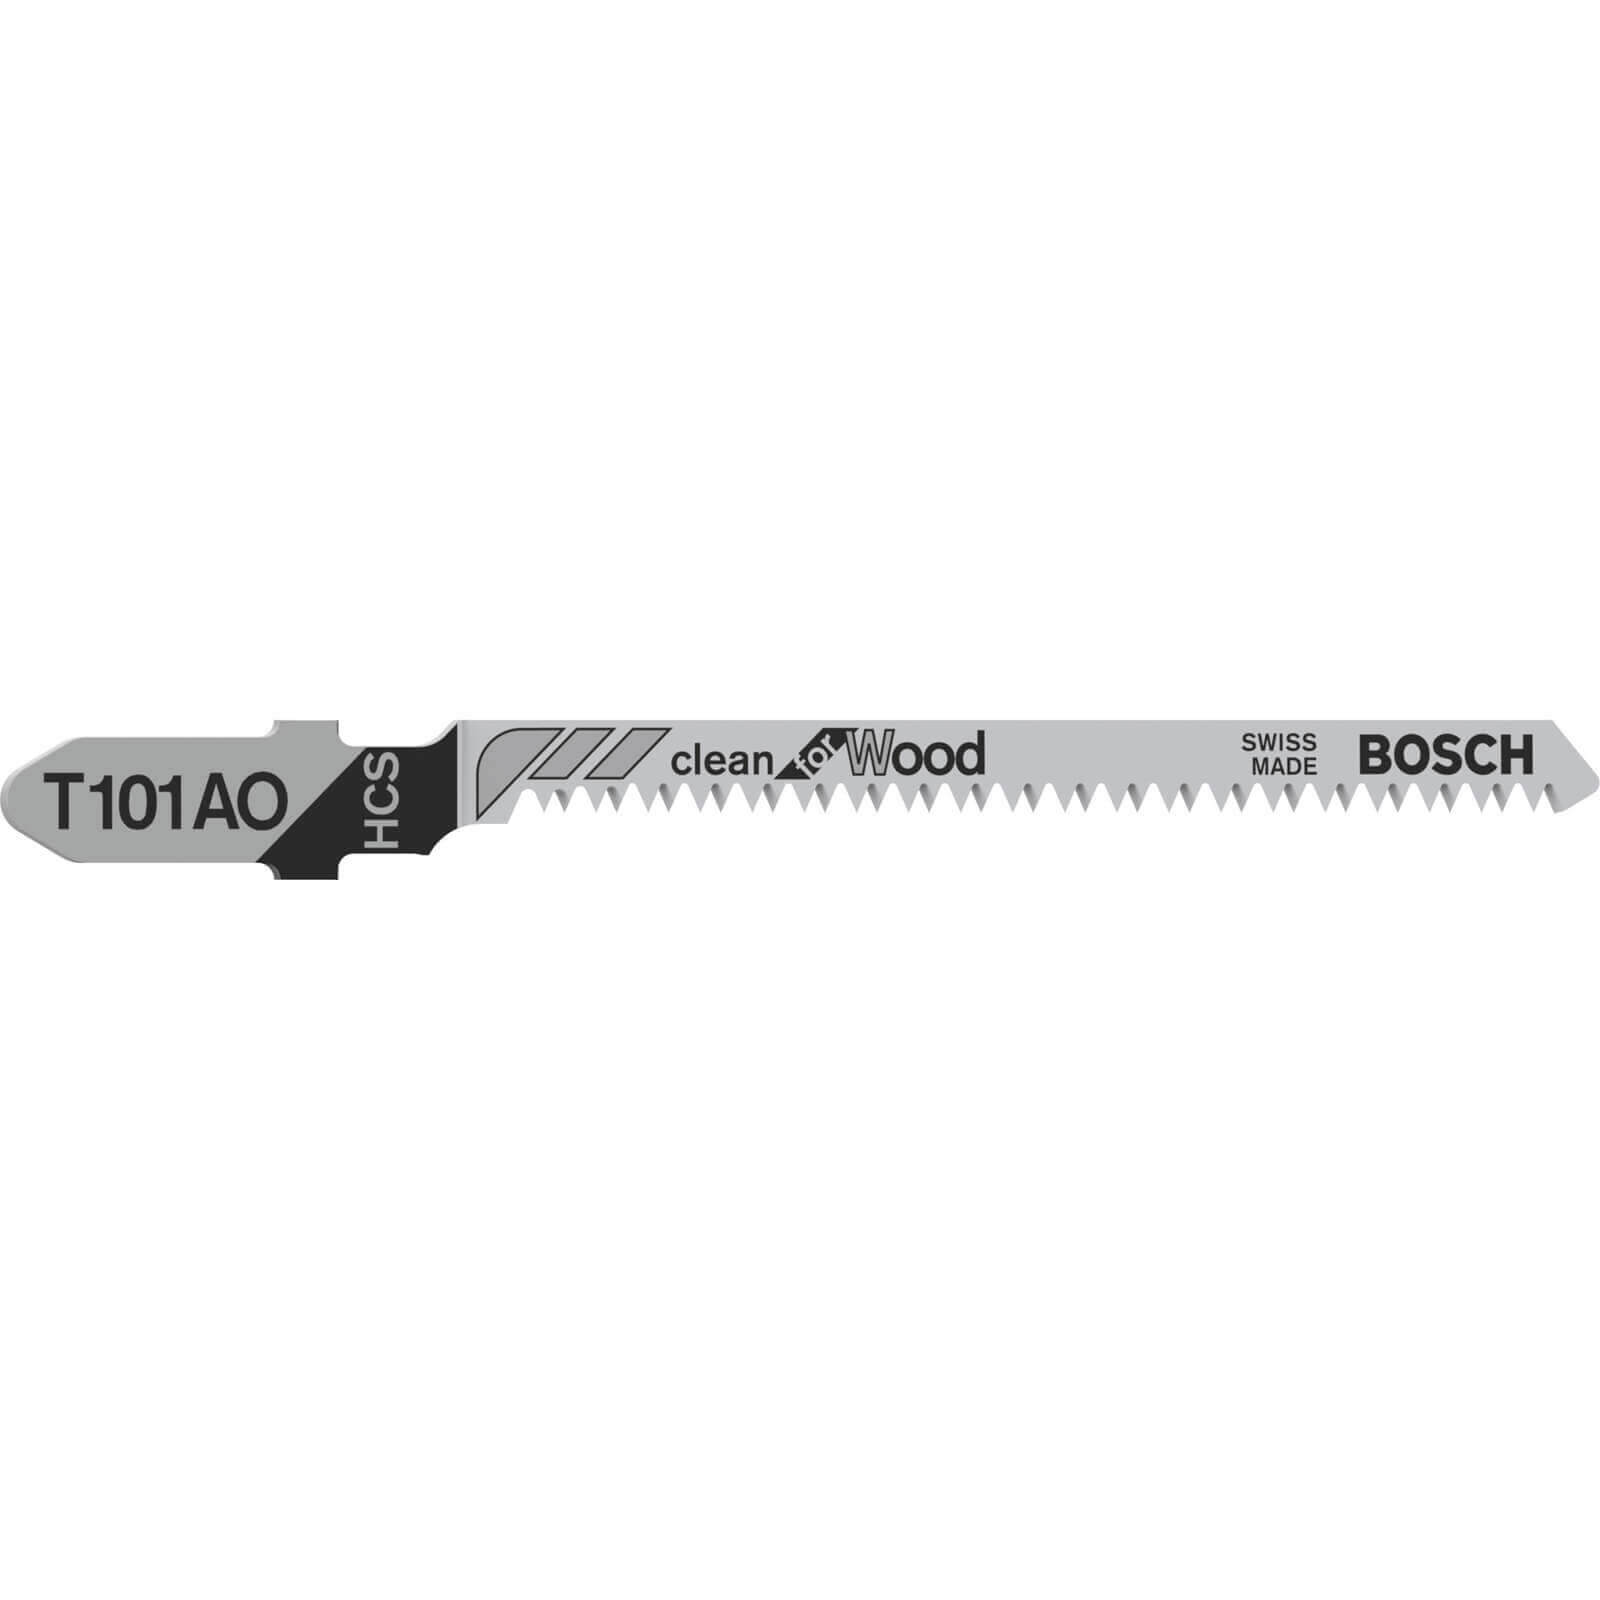 Image of Bosch T101 AO Wood Cutting Jigsaw Blades Pack of 5